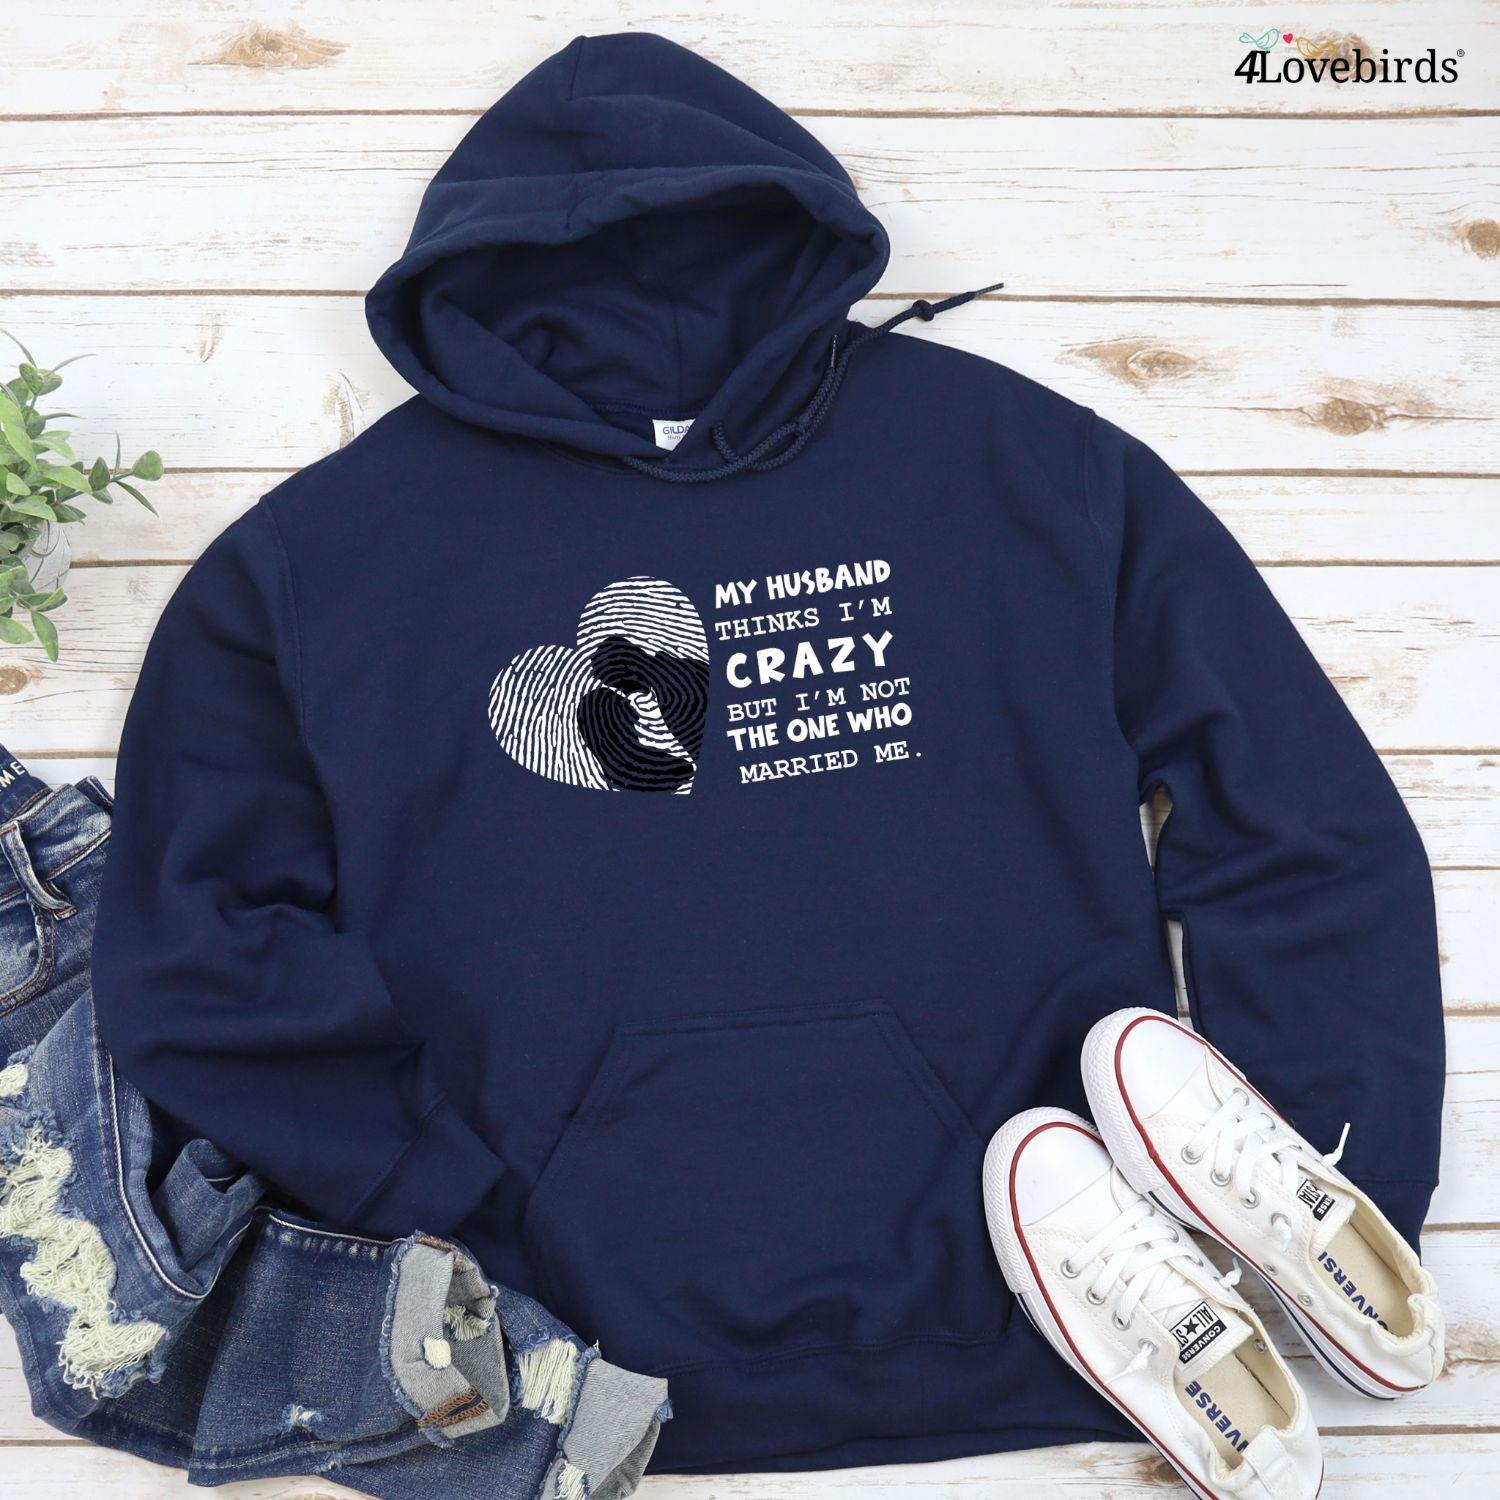 My Wife Thinks I'm Crazy But I'm Not The One Who Married Me T-Shirt, Funny Hoodies, Humorous Sweatshirts, Couple Gifts - 4Lovebirds